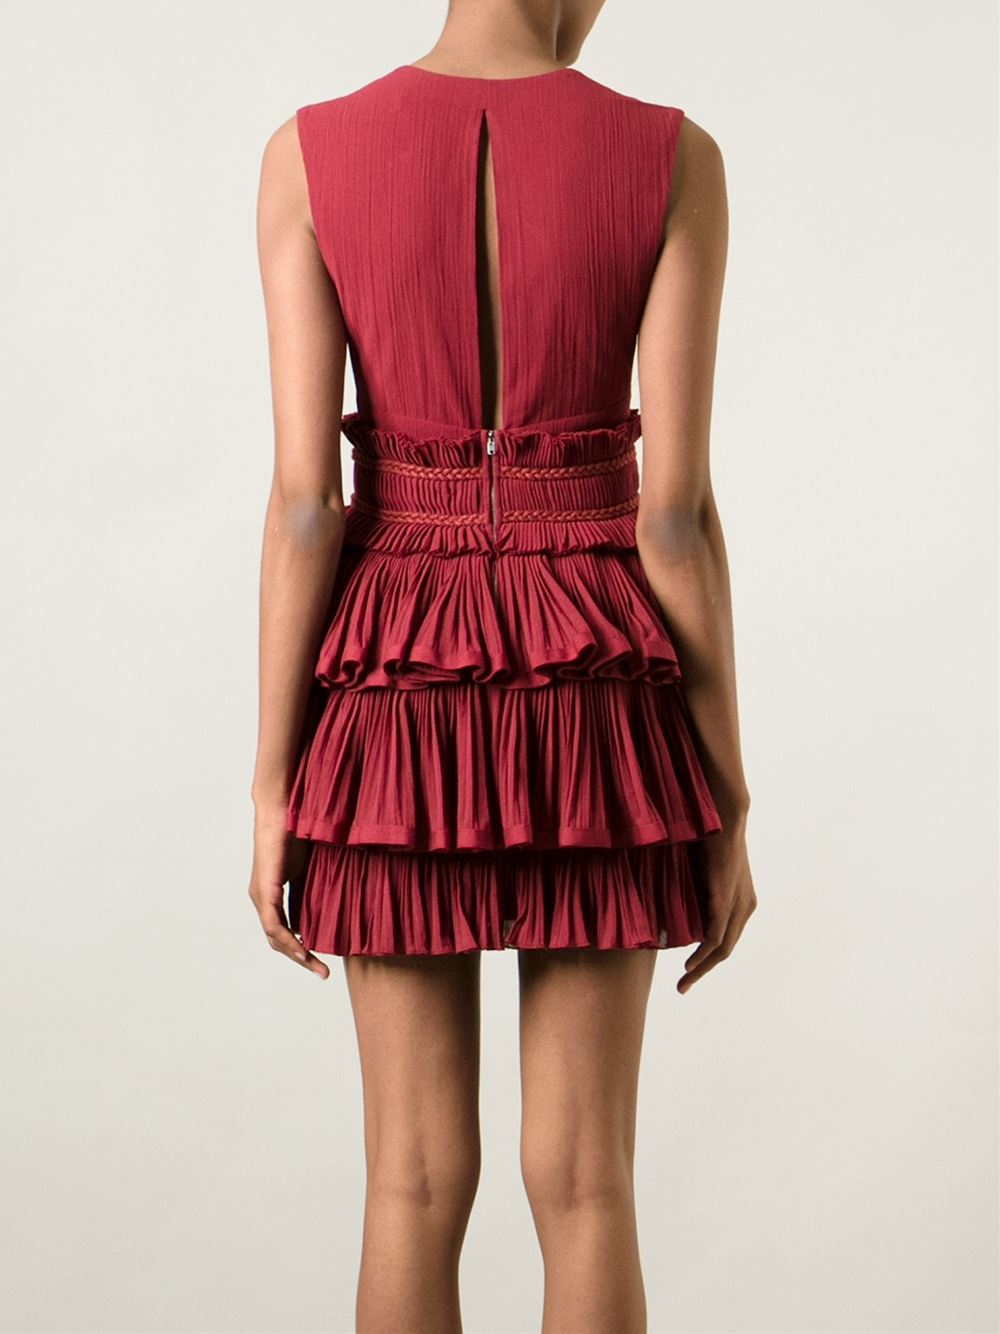 Lyst - Isabel Marant Tiered Ruffled Dress in Red